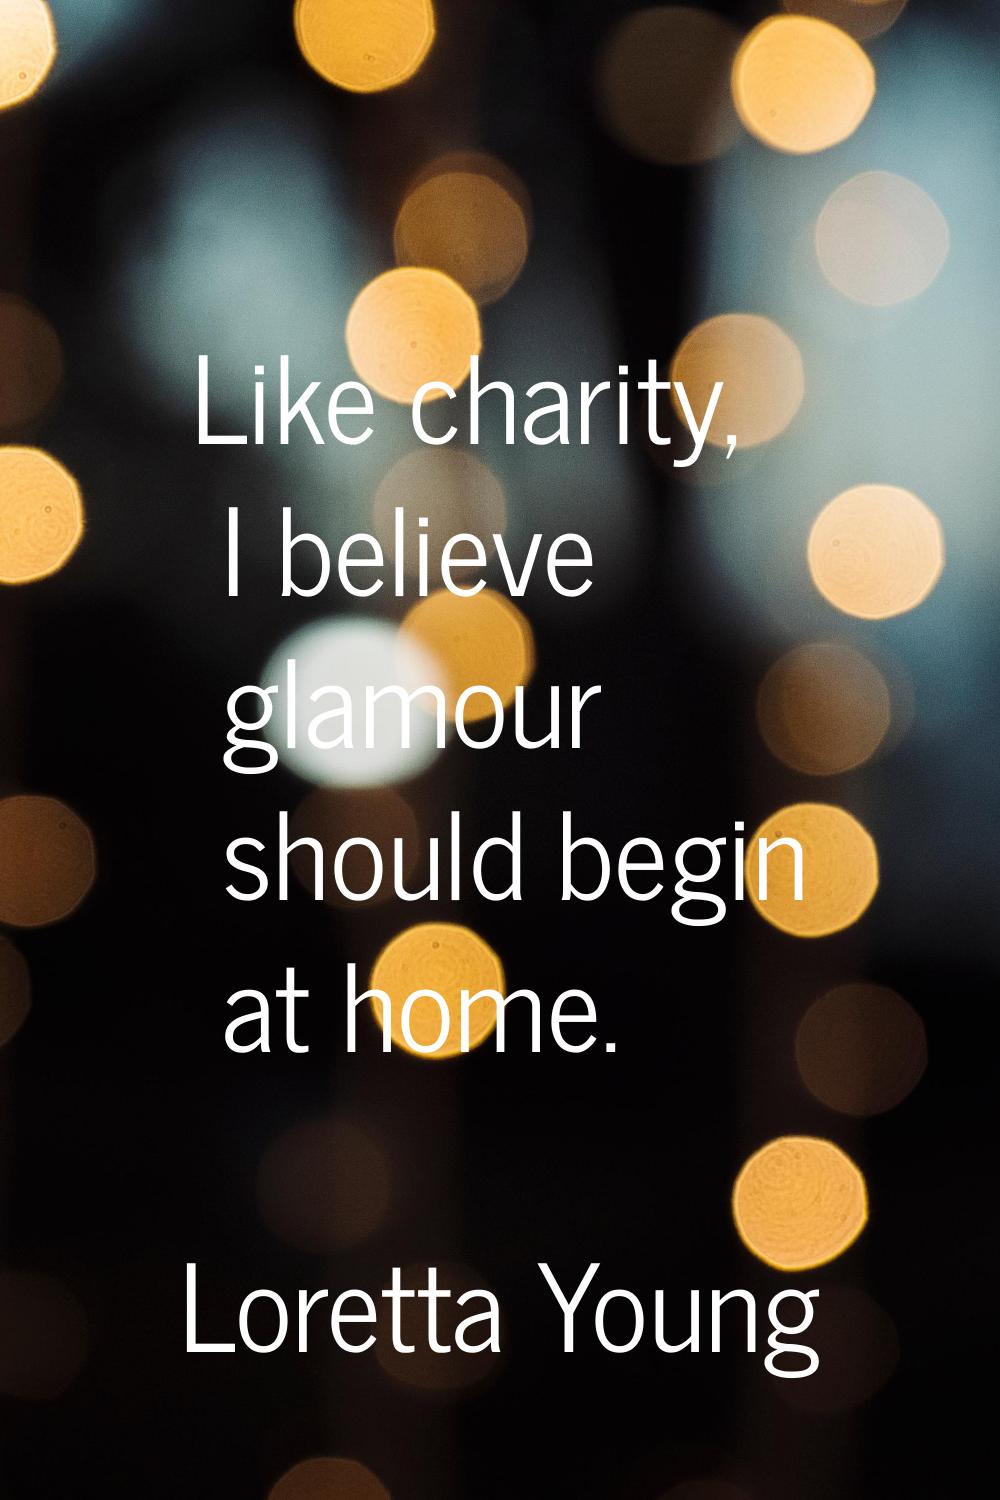 Like charity, I believe glamour should begin at home.